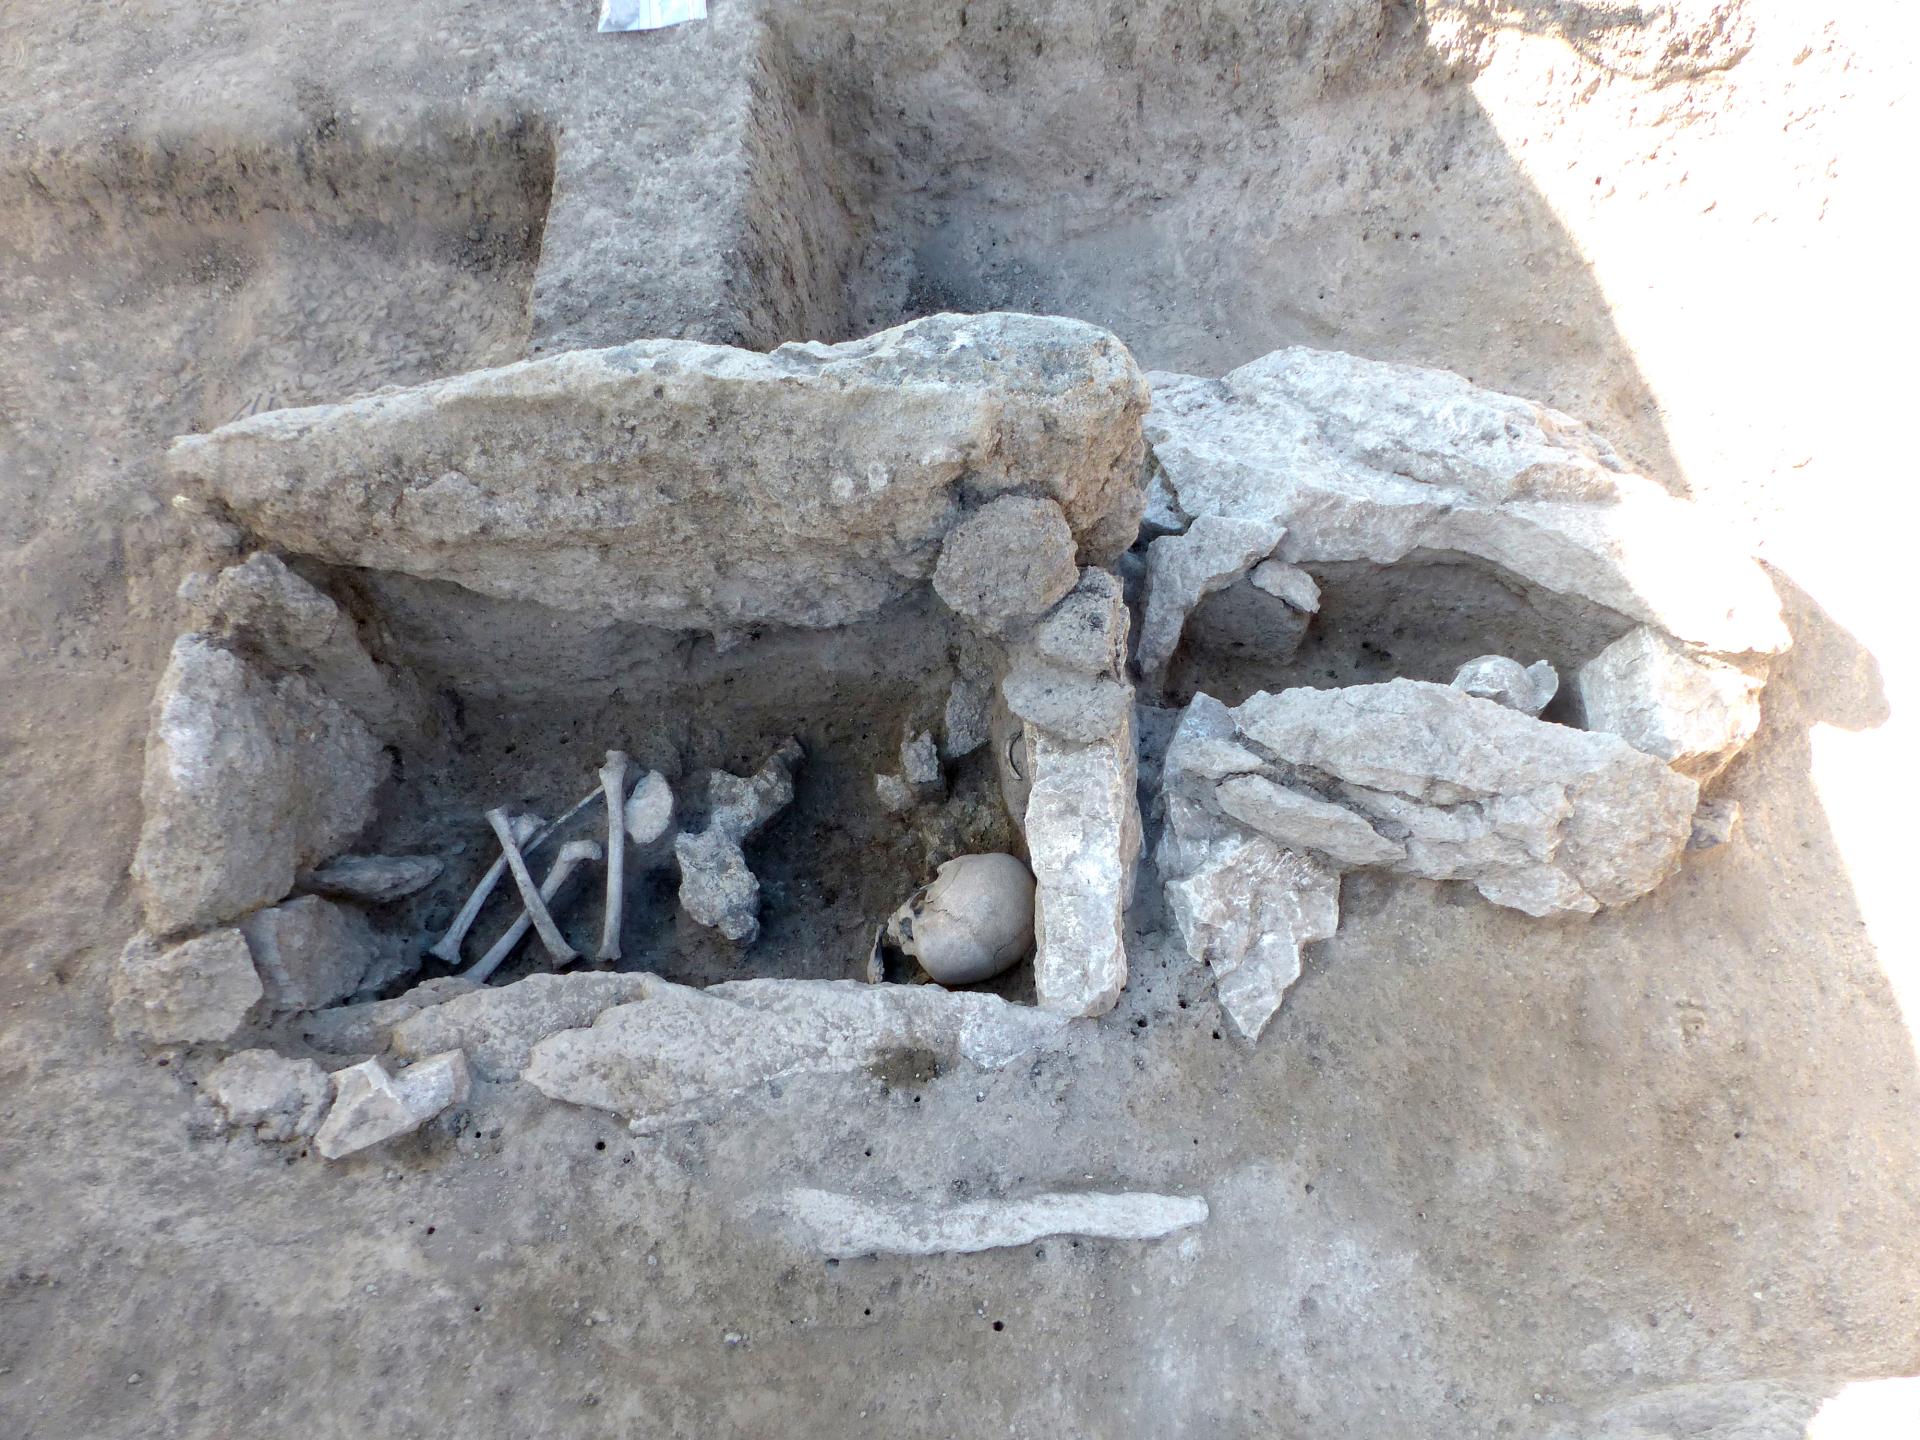 Full gamut of Neolithic occupation, funerary practices found at site in France